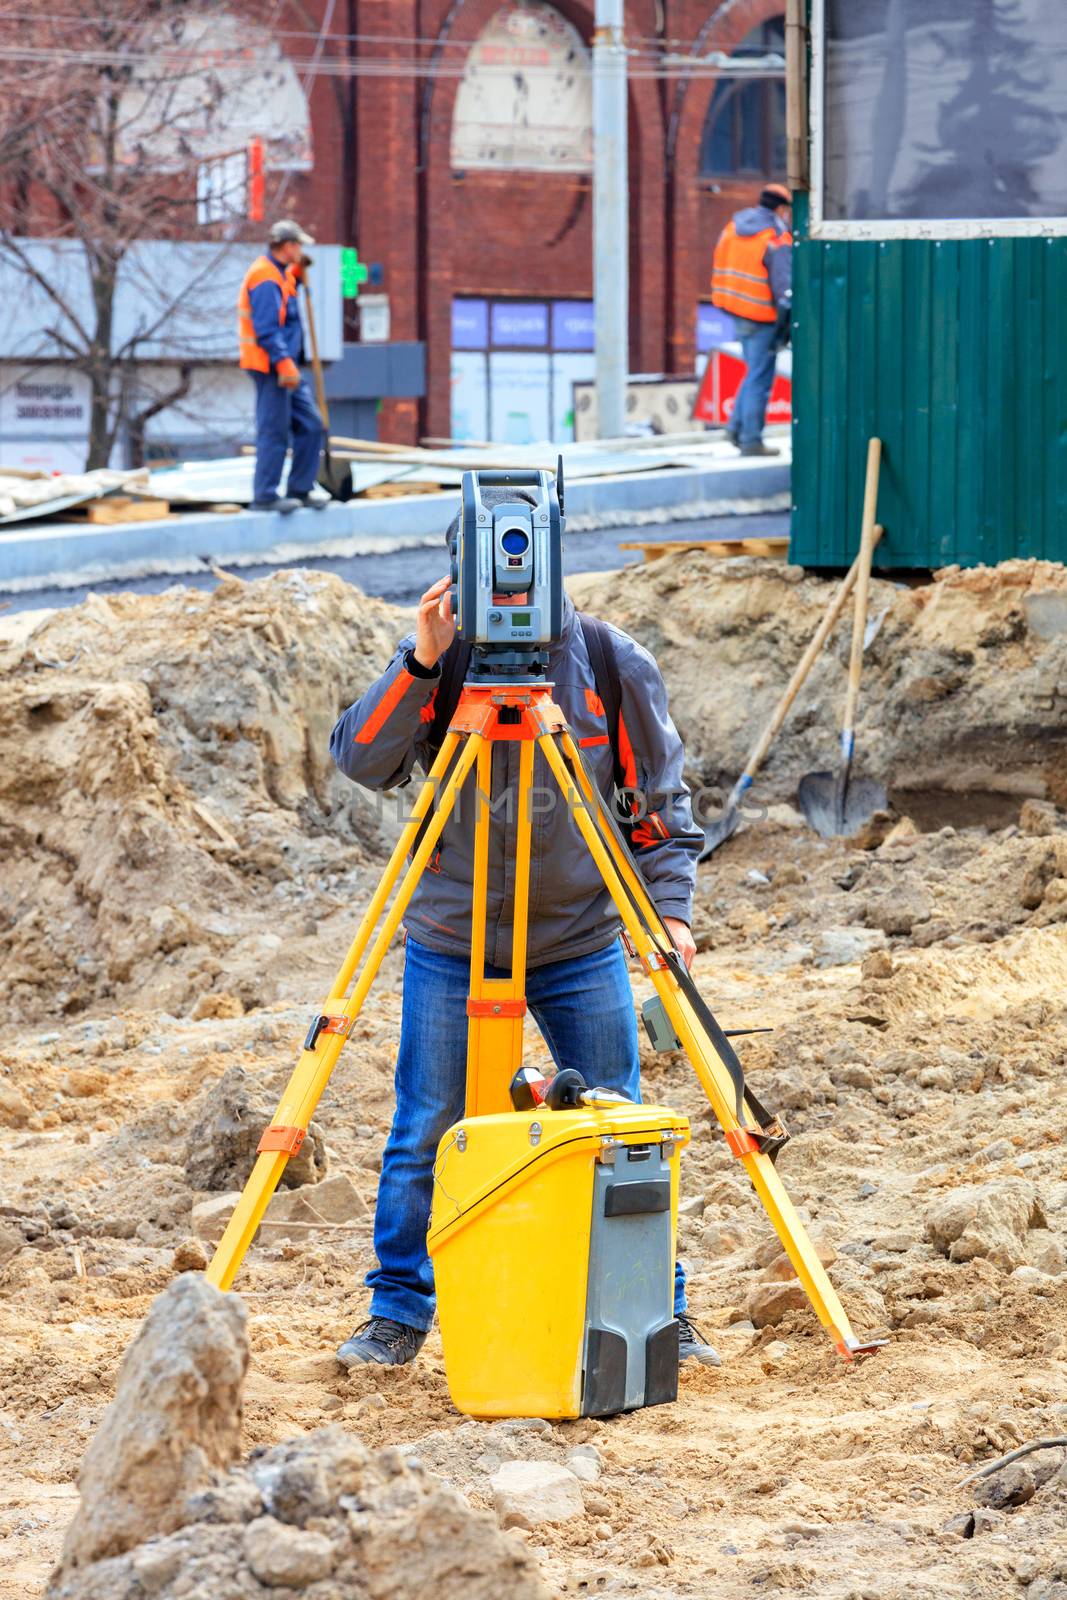 A road service engineer uses a laser level at a construction site. by Sergii